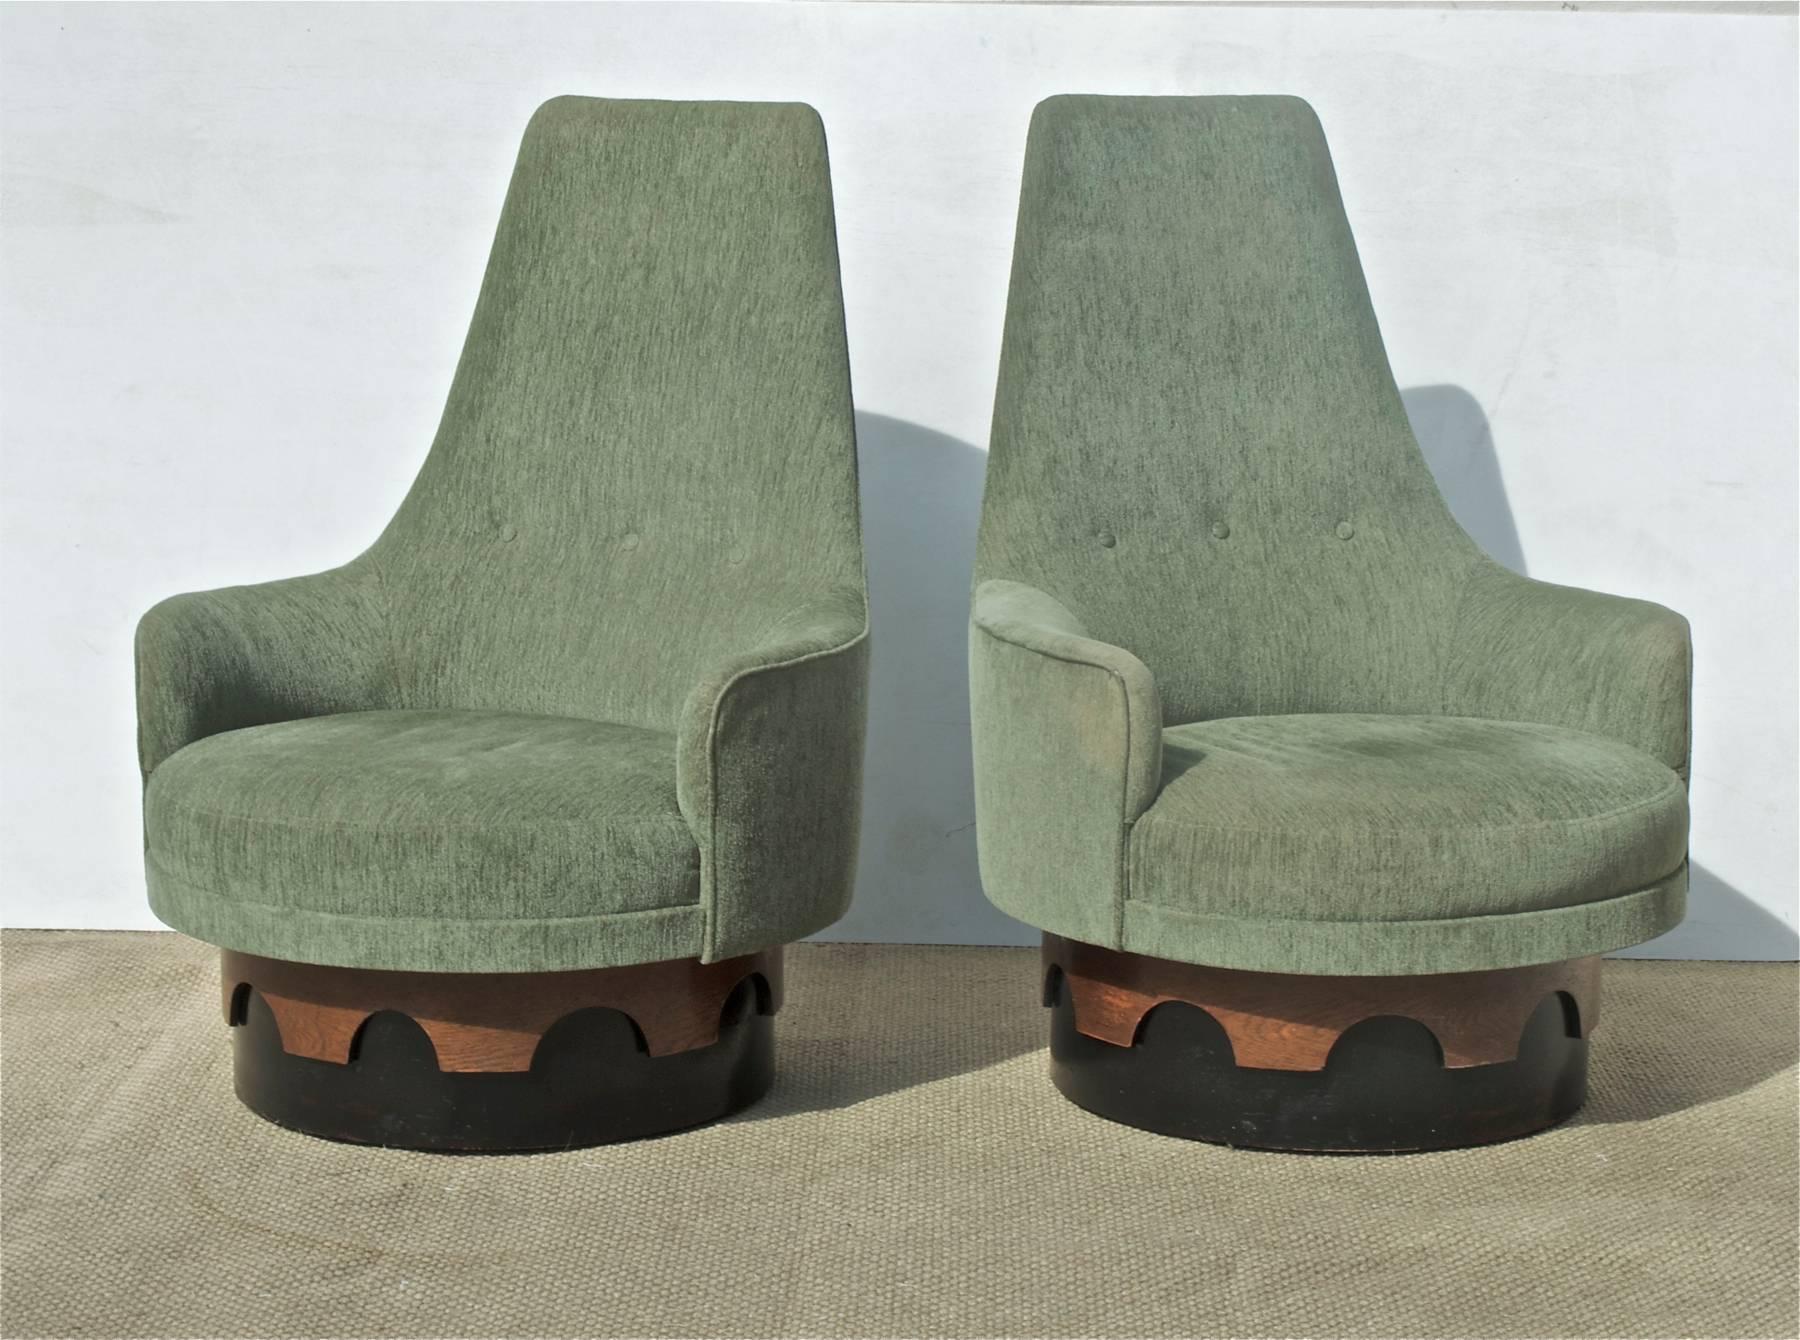 Iconic Mid-Century Modern swivel chairs by Adrian Pearsall. The pair of lounge chairs were made by Craft Associates and are of a particularly unique design, most notably the 360 degree swivel function. Chairs are sporting a medium green chenille